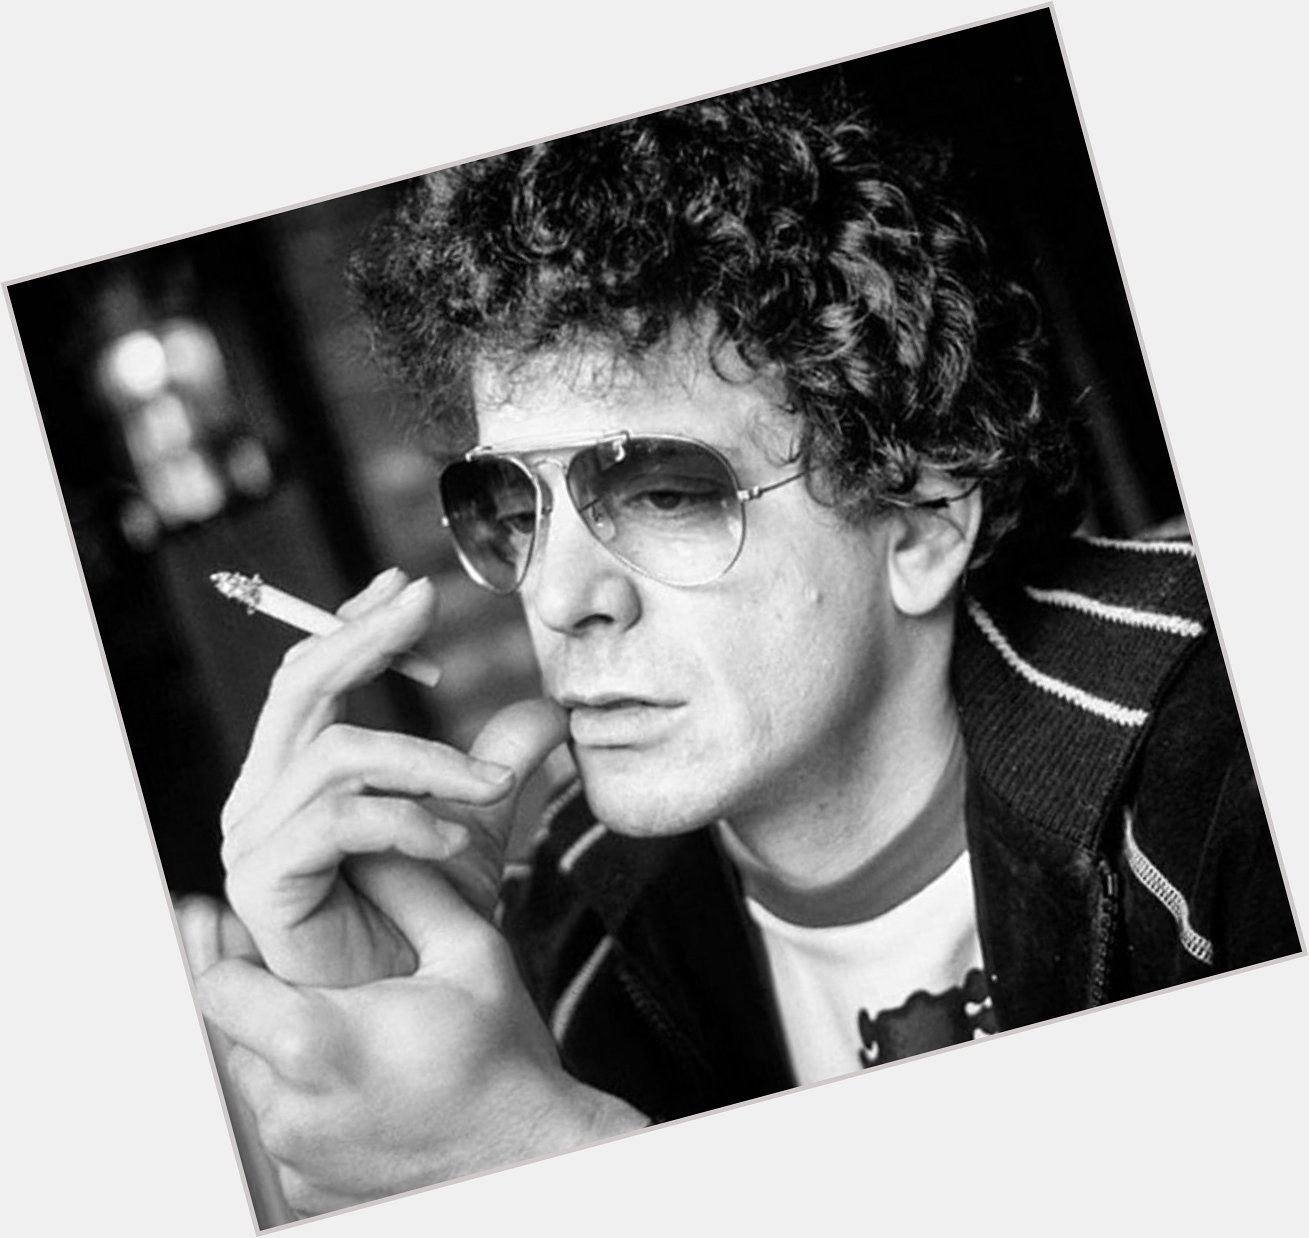 I almost forgot! Happy birthday to Lou Reed! He would\ve been 75 today 